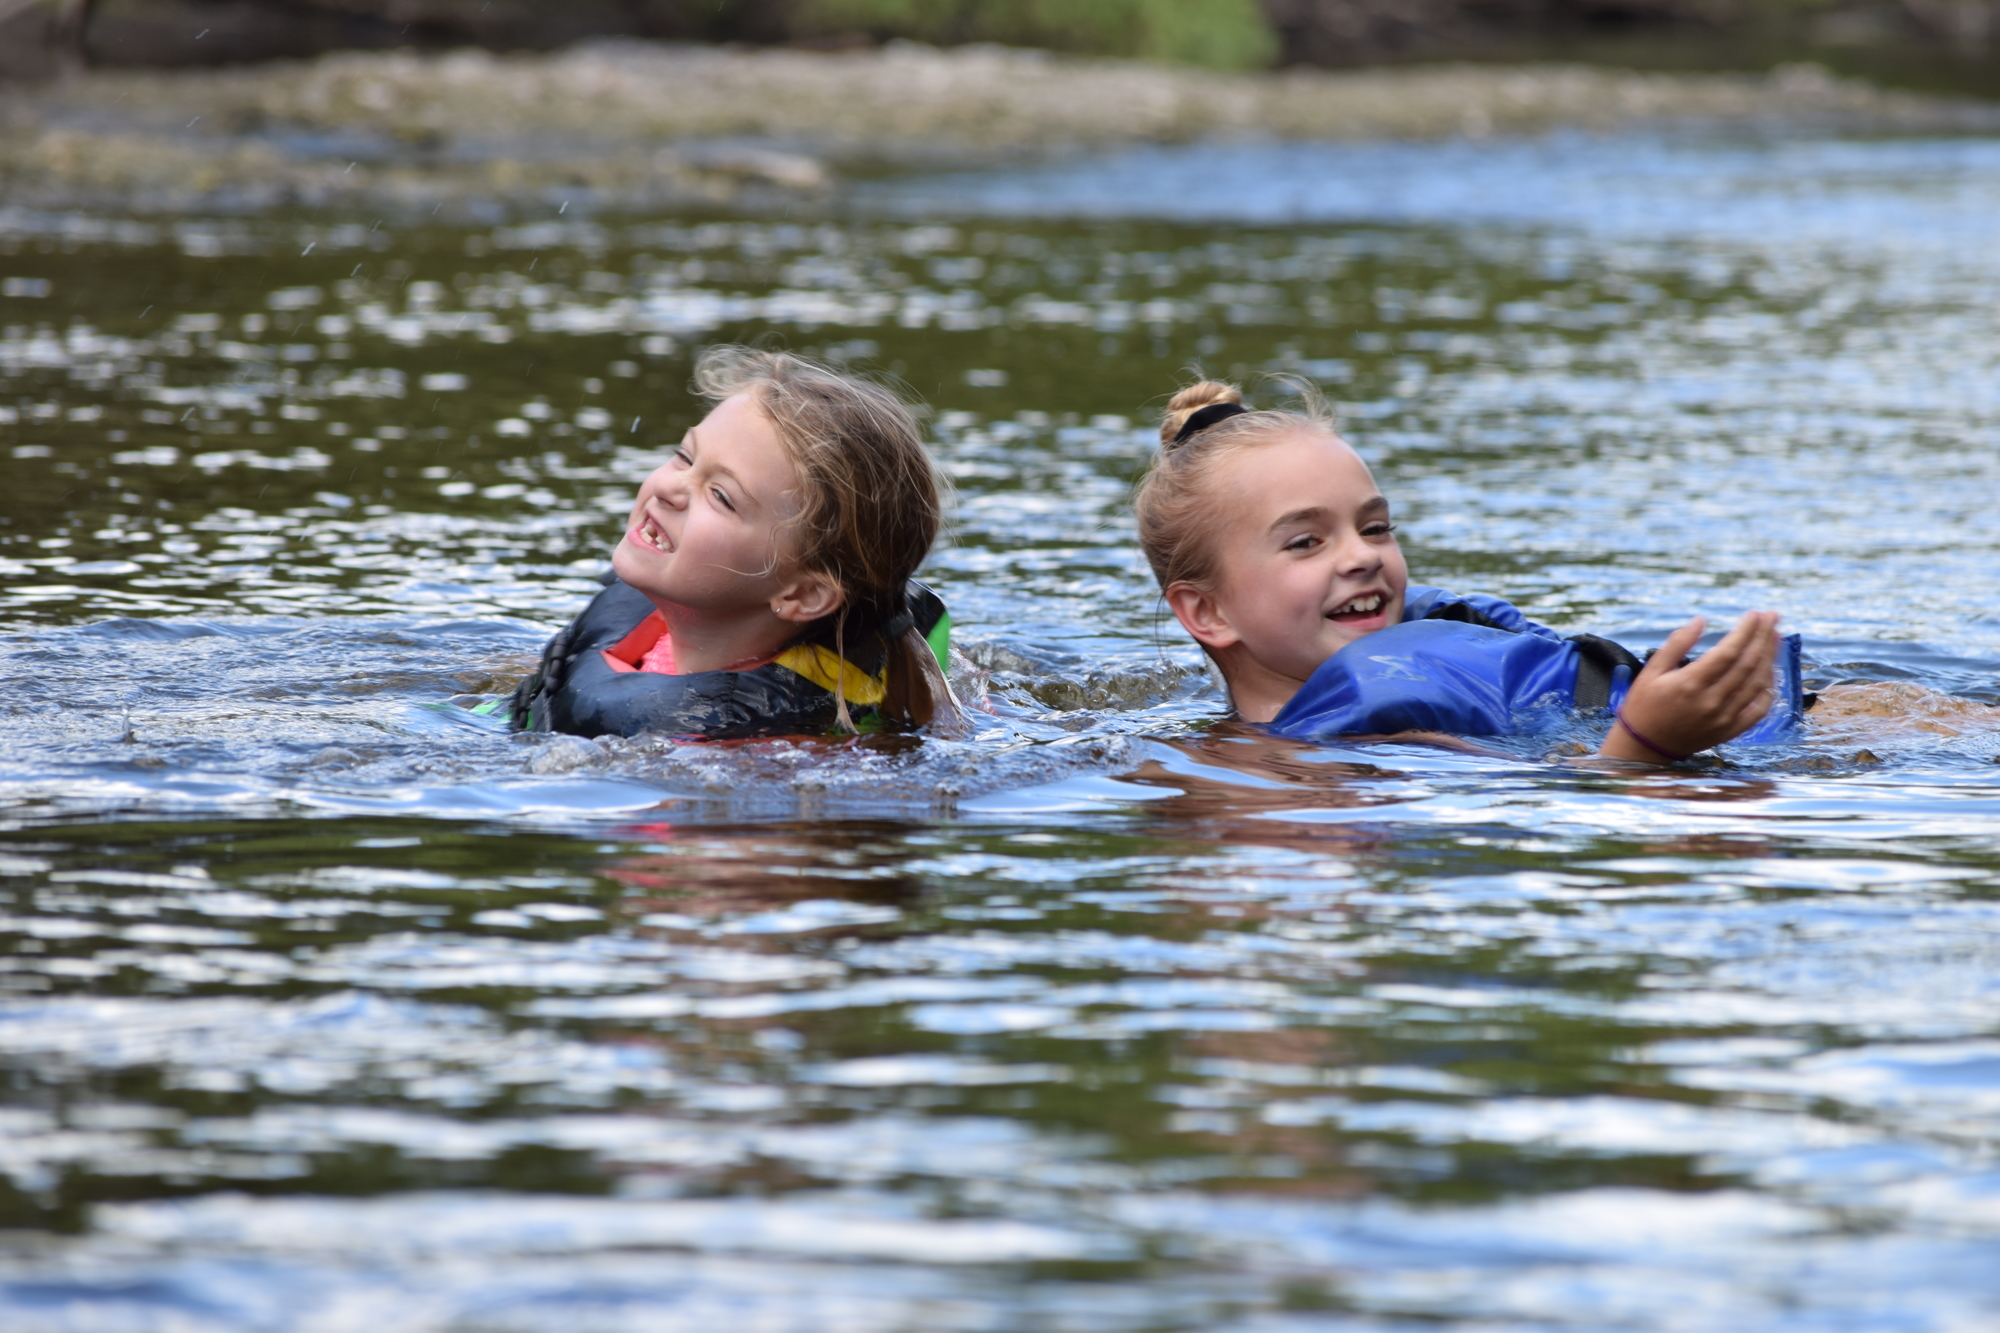 Peace River has some areas where visitors of all ages will delight in short lazy river rides.